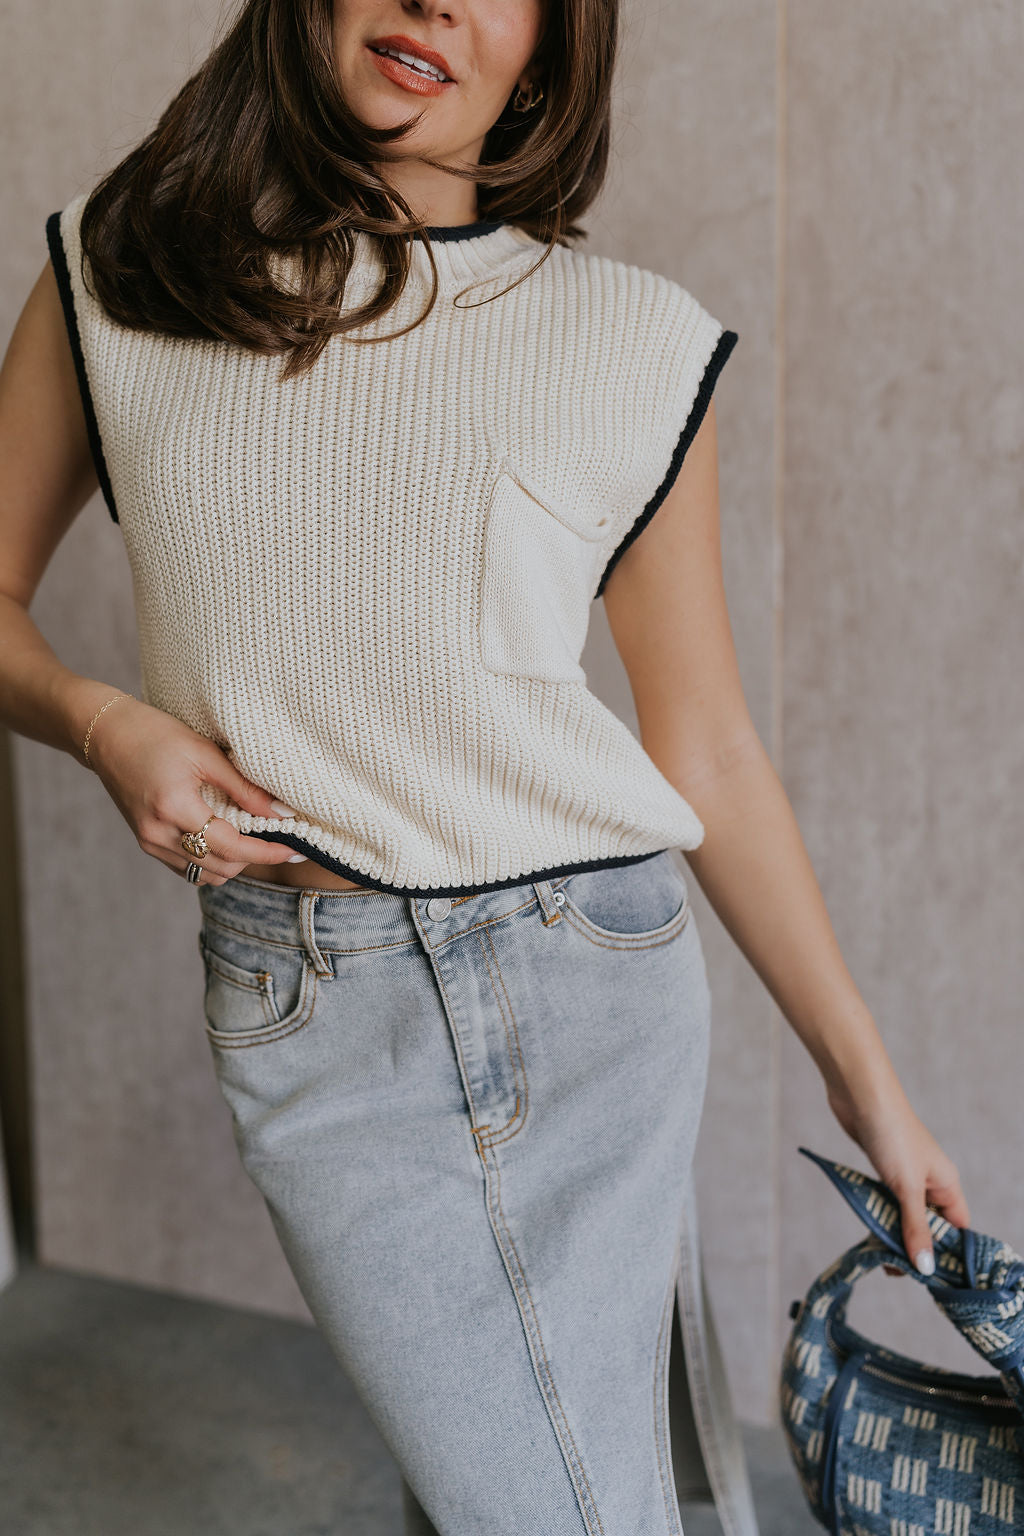 Close up view of female model wearing the Vivian Ivory & Navy Knit Sleeveless Sweater which features Cream Cable Knit Fabric, Navy Trim Details, Left Front Chest Pocket, High Neckline and Sleeveless.